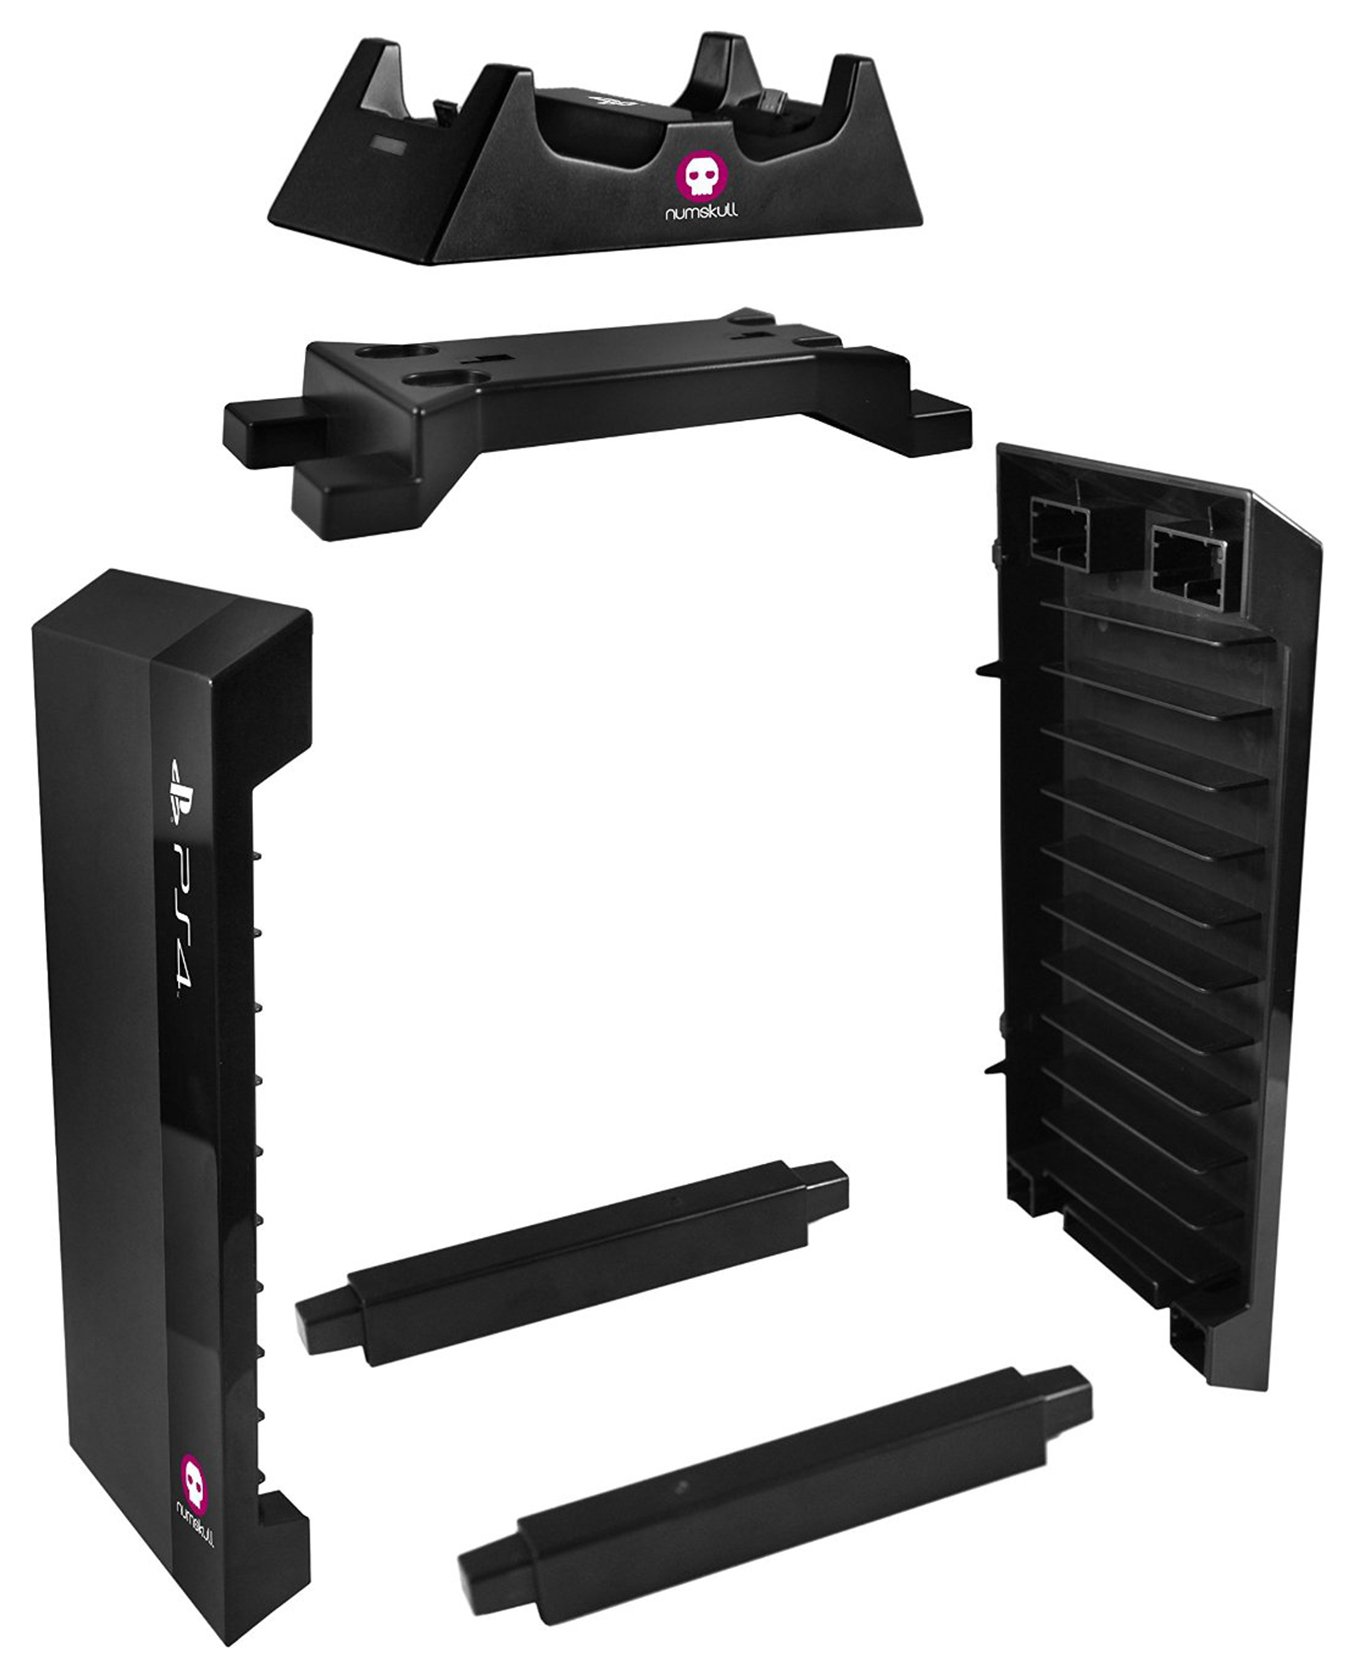 ps4 games tower and charging station